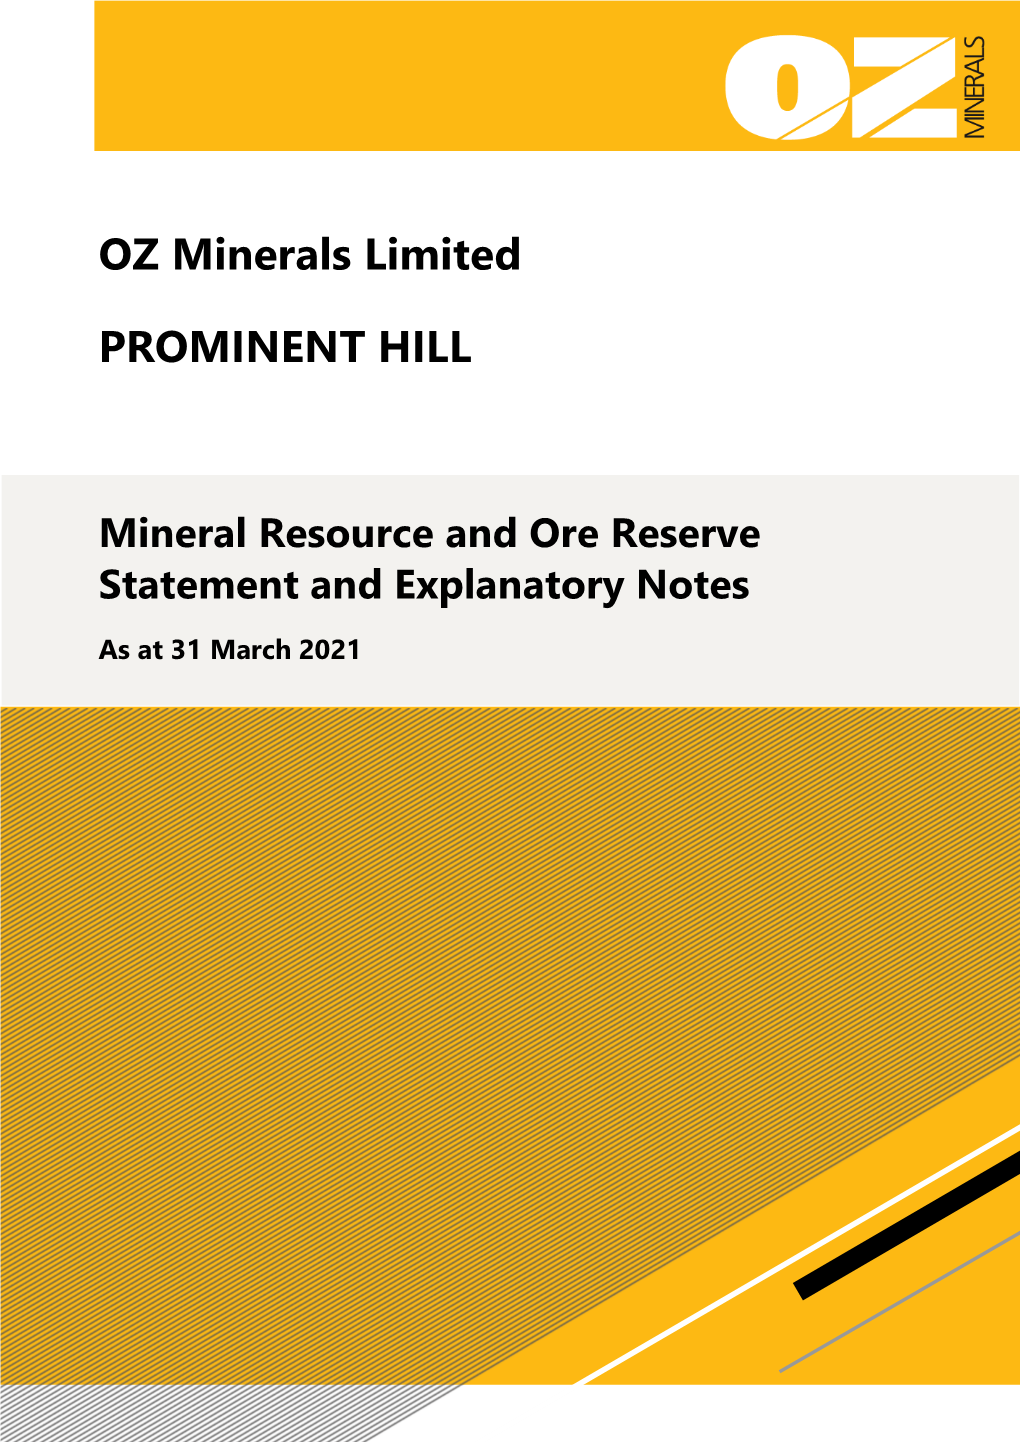 Prominent Hill Mineral Resource & Ore Reserve Statement